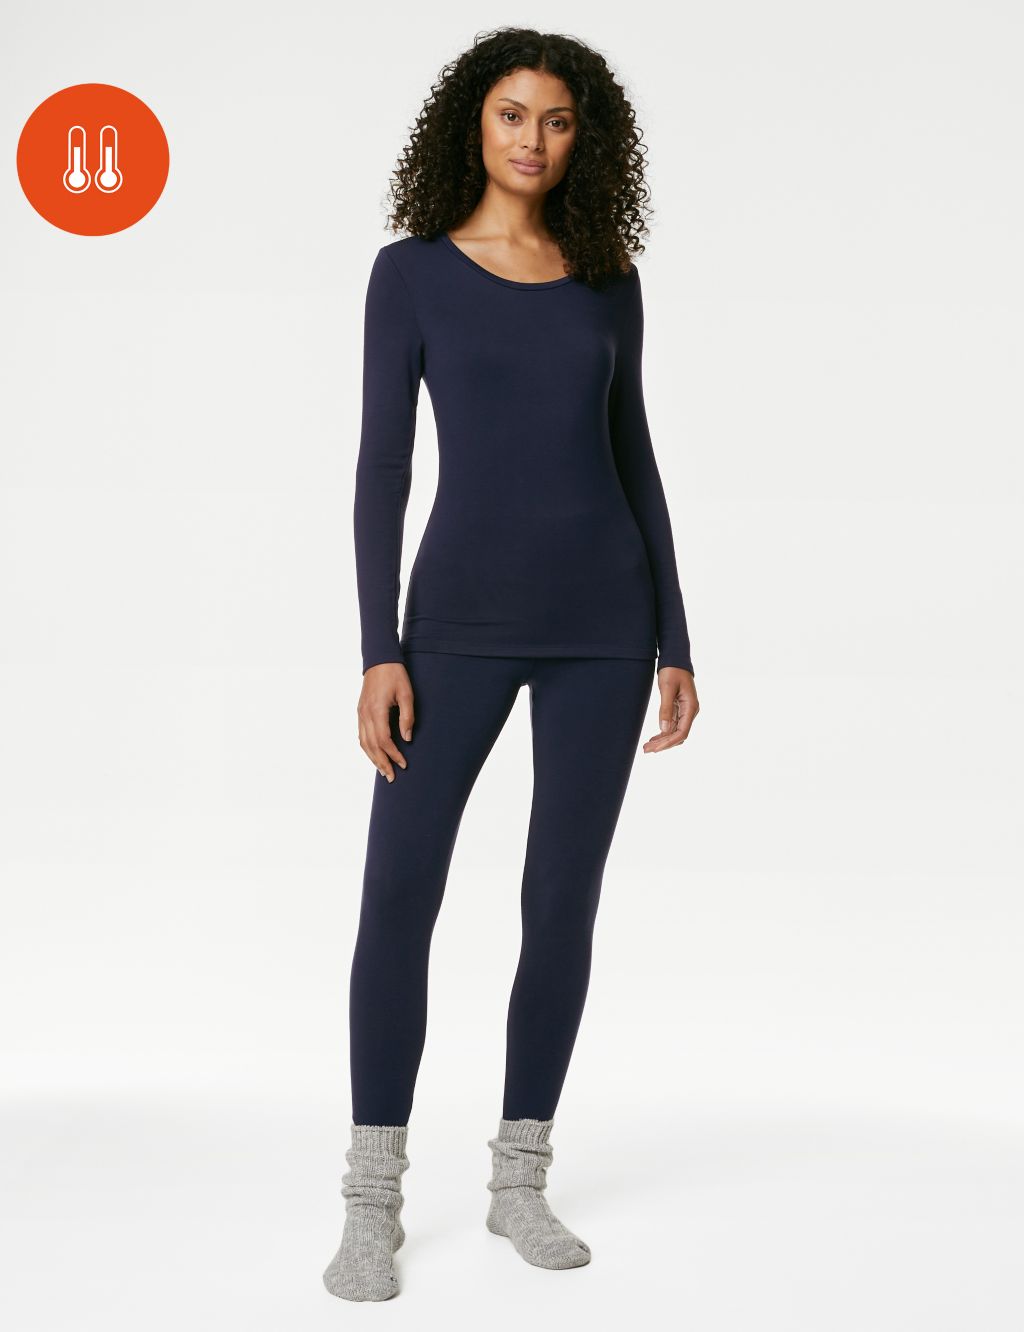 Thermals for Women, Women's Base Layers